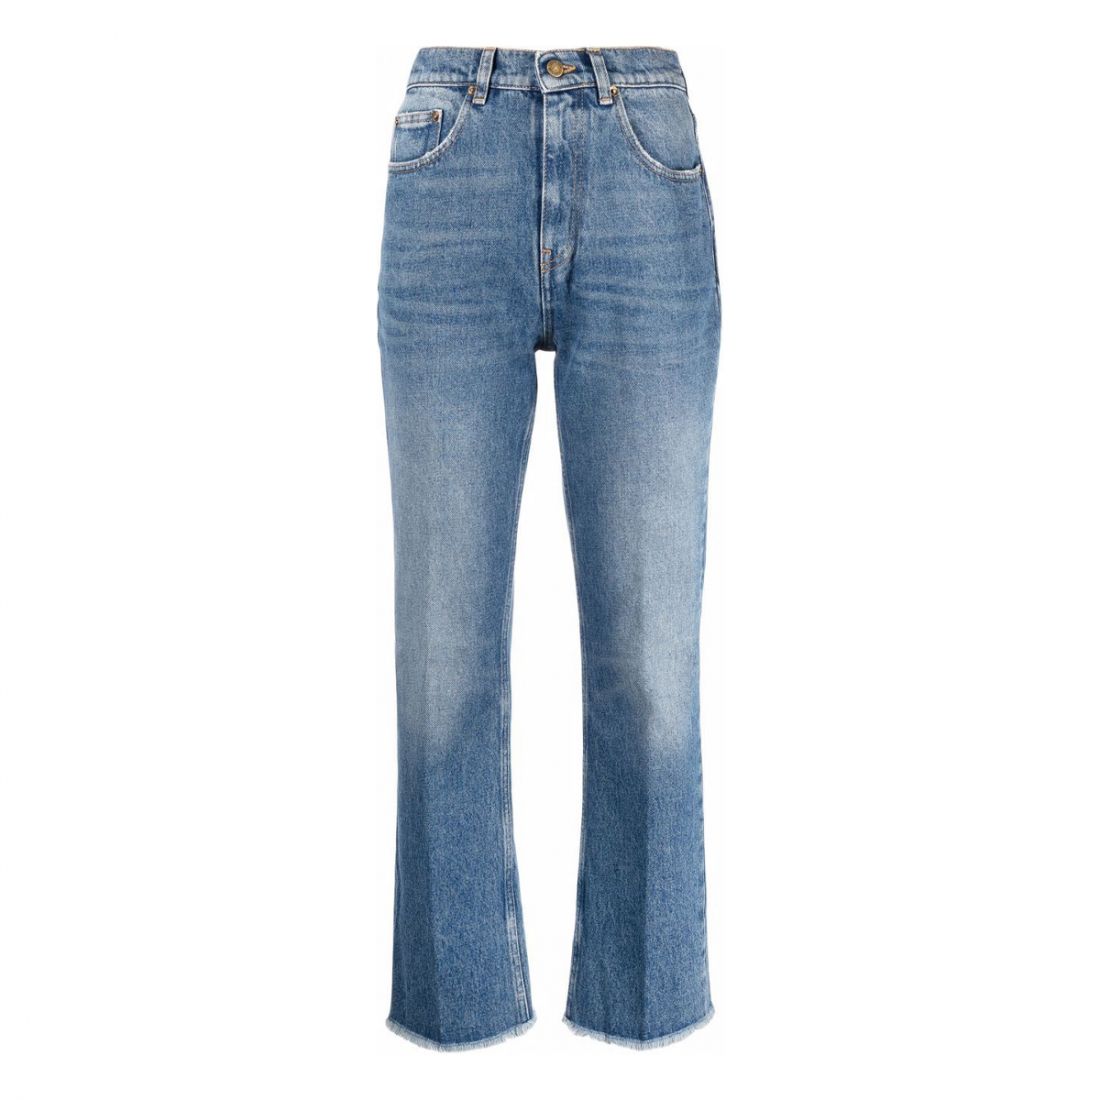 Golden Goose Deluxe Brand - Jeans 'Faded' pour Femmes